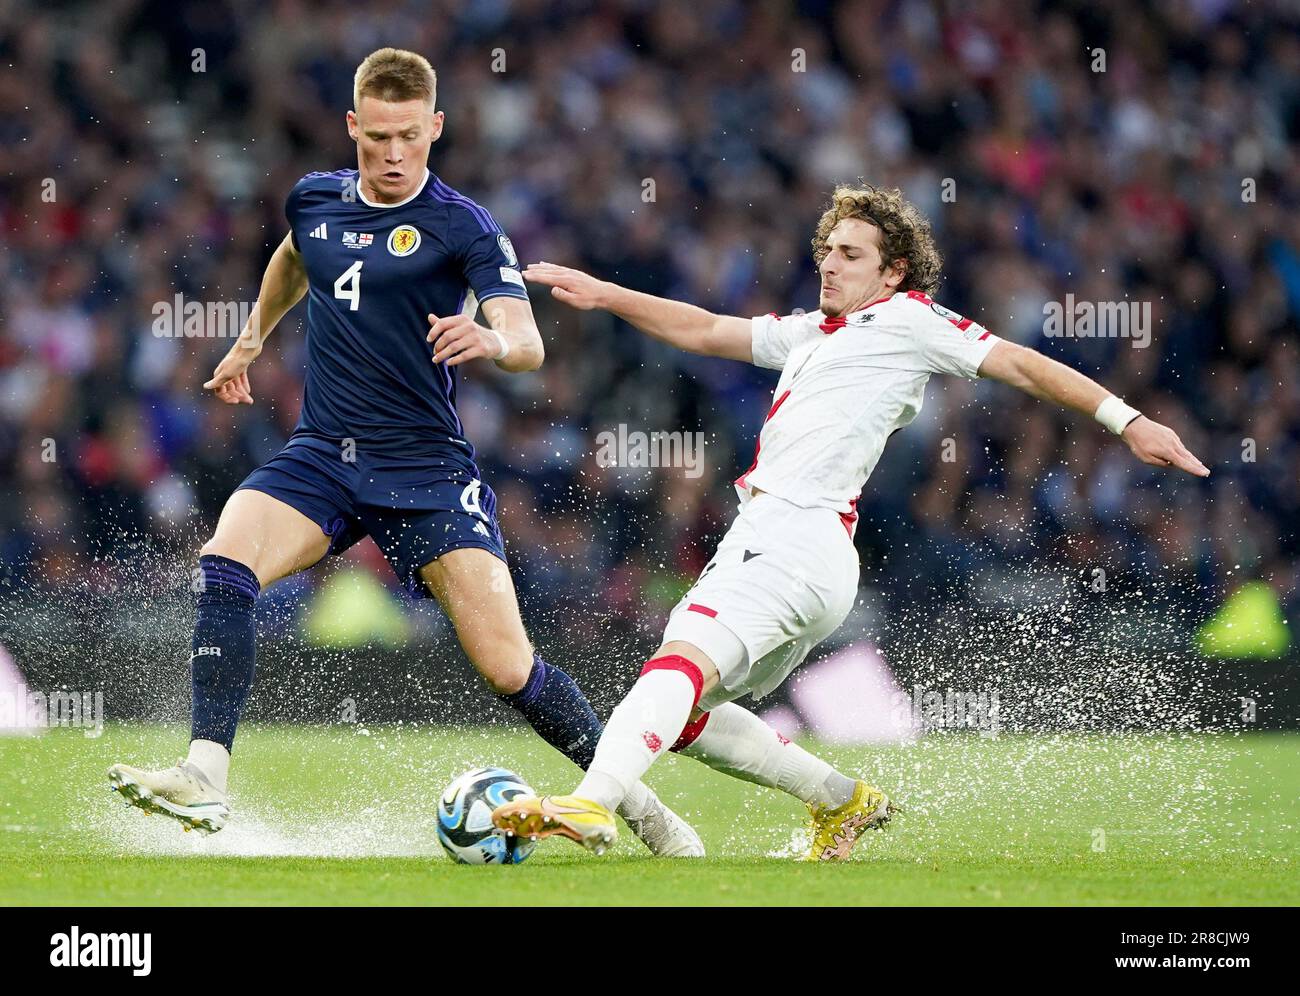 Scotland's Scott McTominay (left) and Georgia's Luka Gagnidze battle for the ball during the UEFA Euro 2024 Qualifying Group A match at Hampden Park, Glasgow. Picture date: Tuesday June 20, 2023. Stock Photo